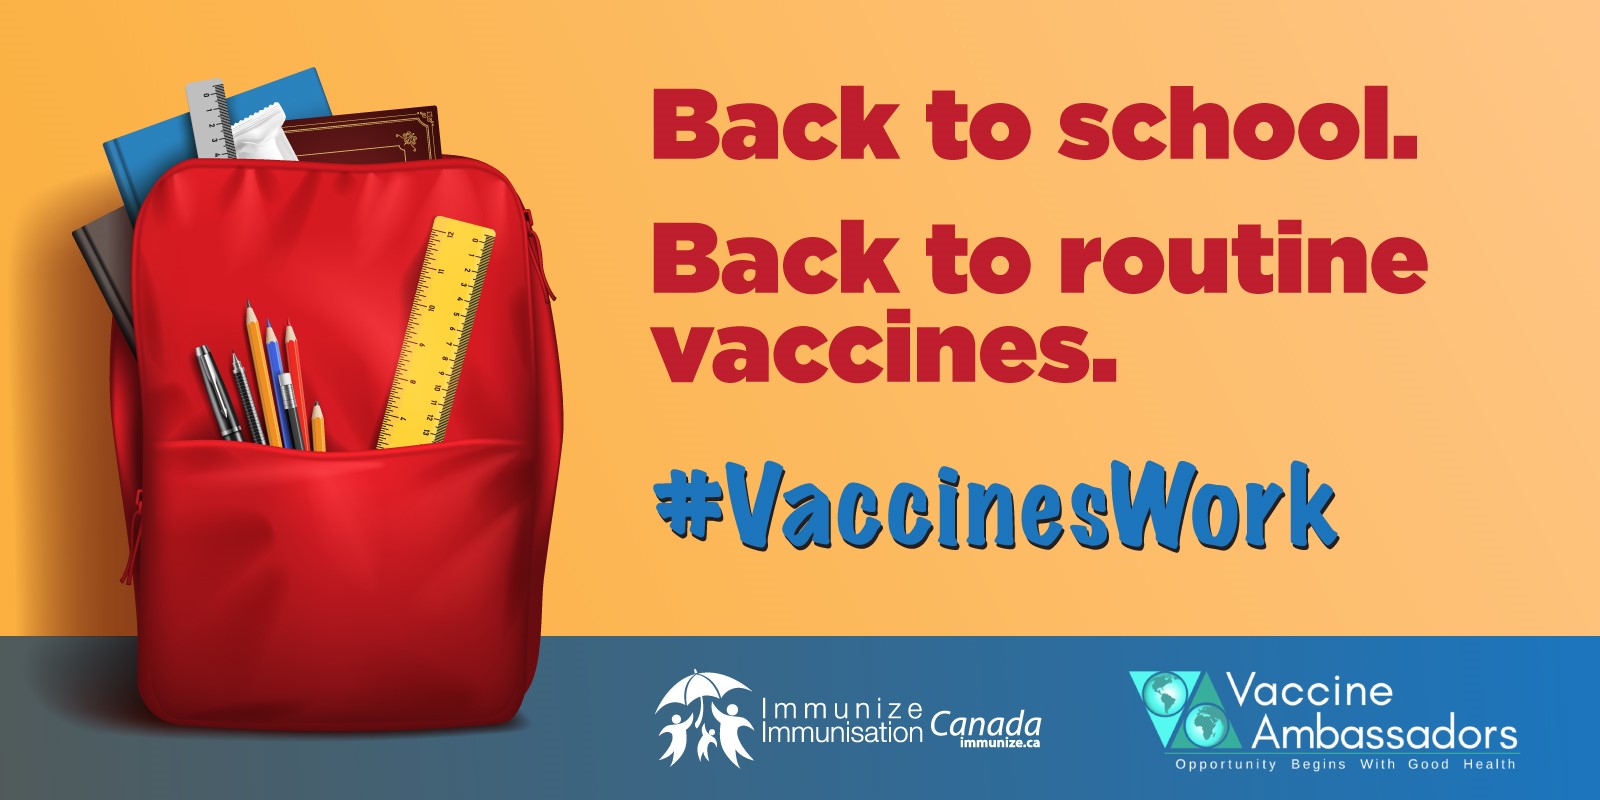 Back to school. Back to routine vaccines.